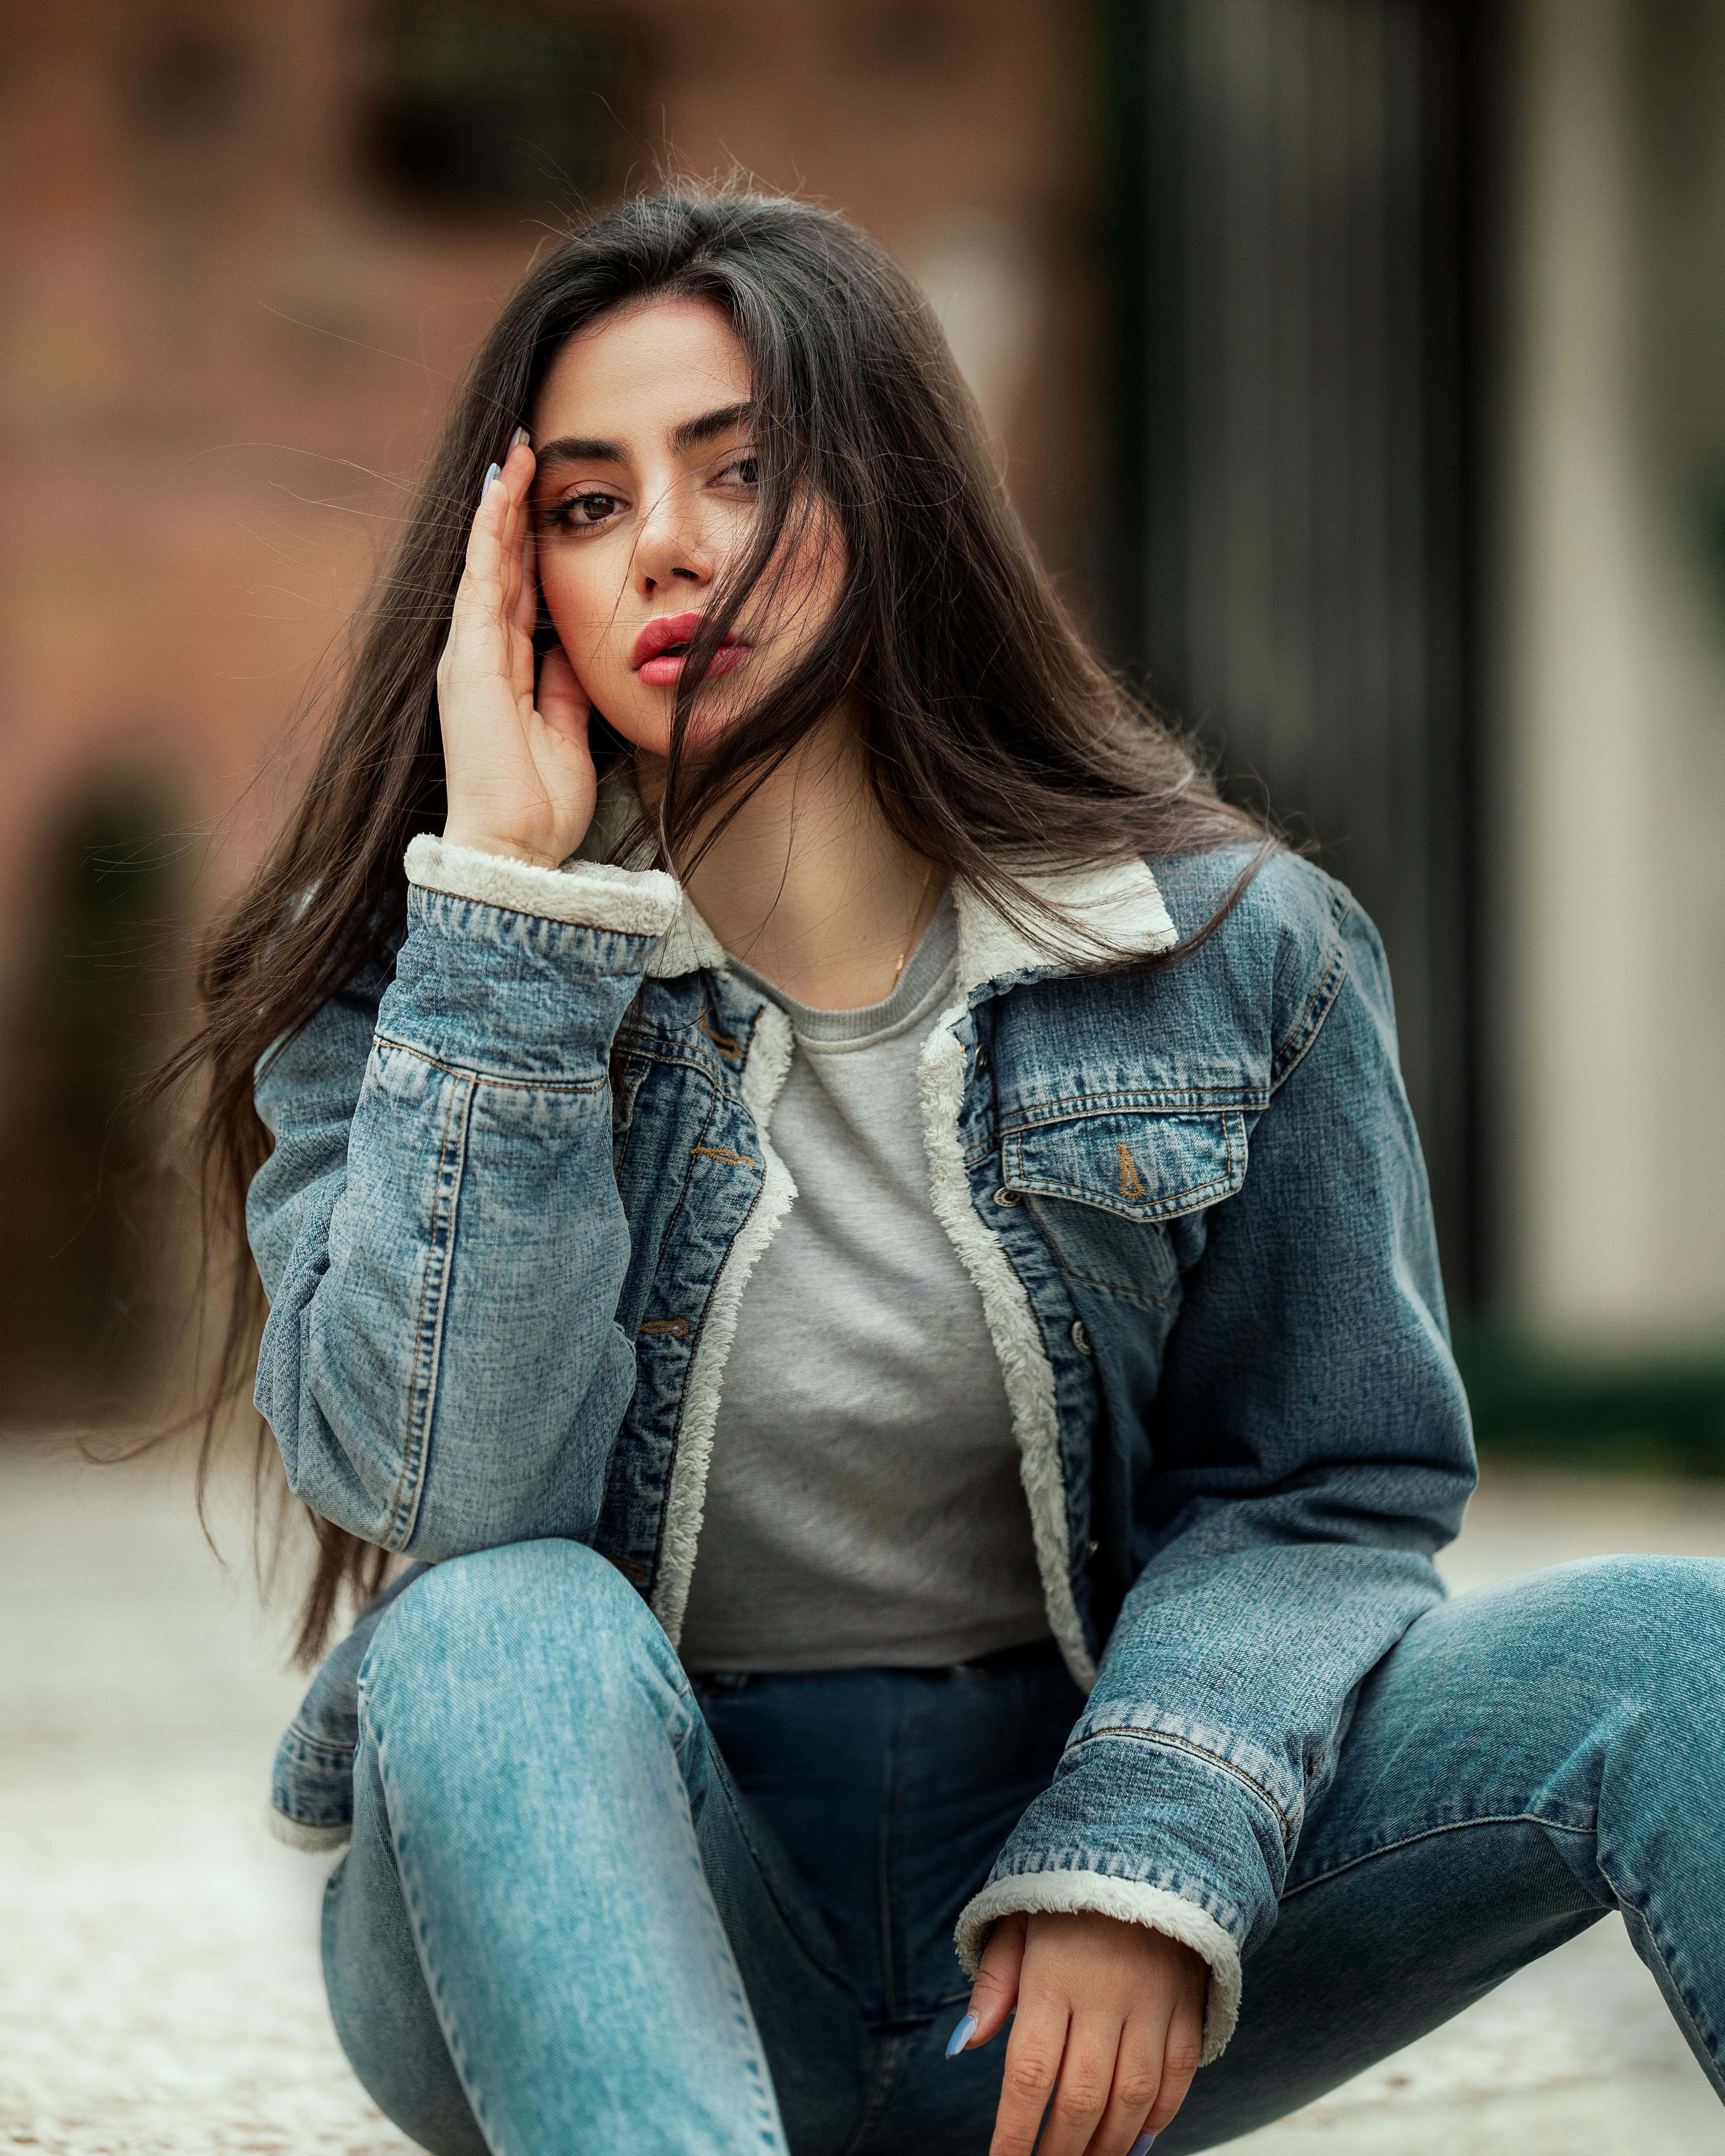 Ladie Fashion Denim: Over 83,843 Royalty-Free Licensable Stock Photos |  Shutterstock